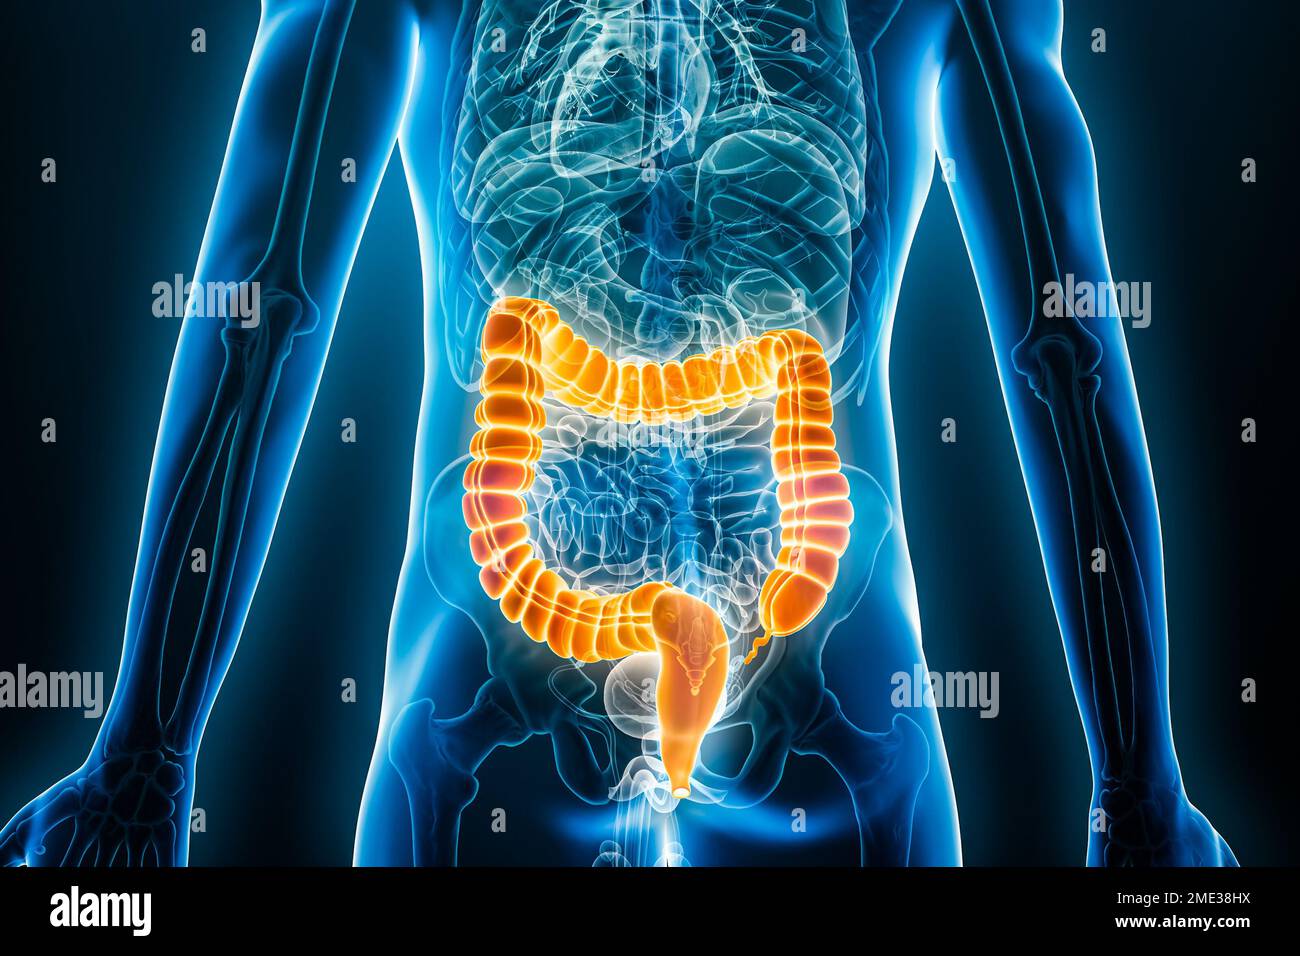 Xray posterior or back view of large intestine or colon 3D rendering illustration with male body contours. Human anatomy, bowels, medical, biology, sc Stock Photo